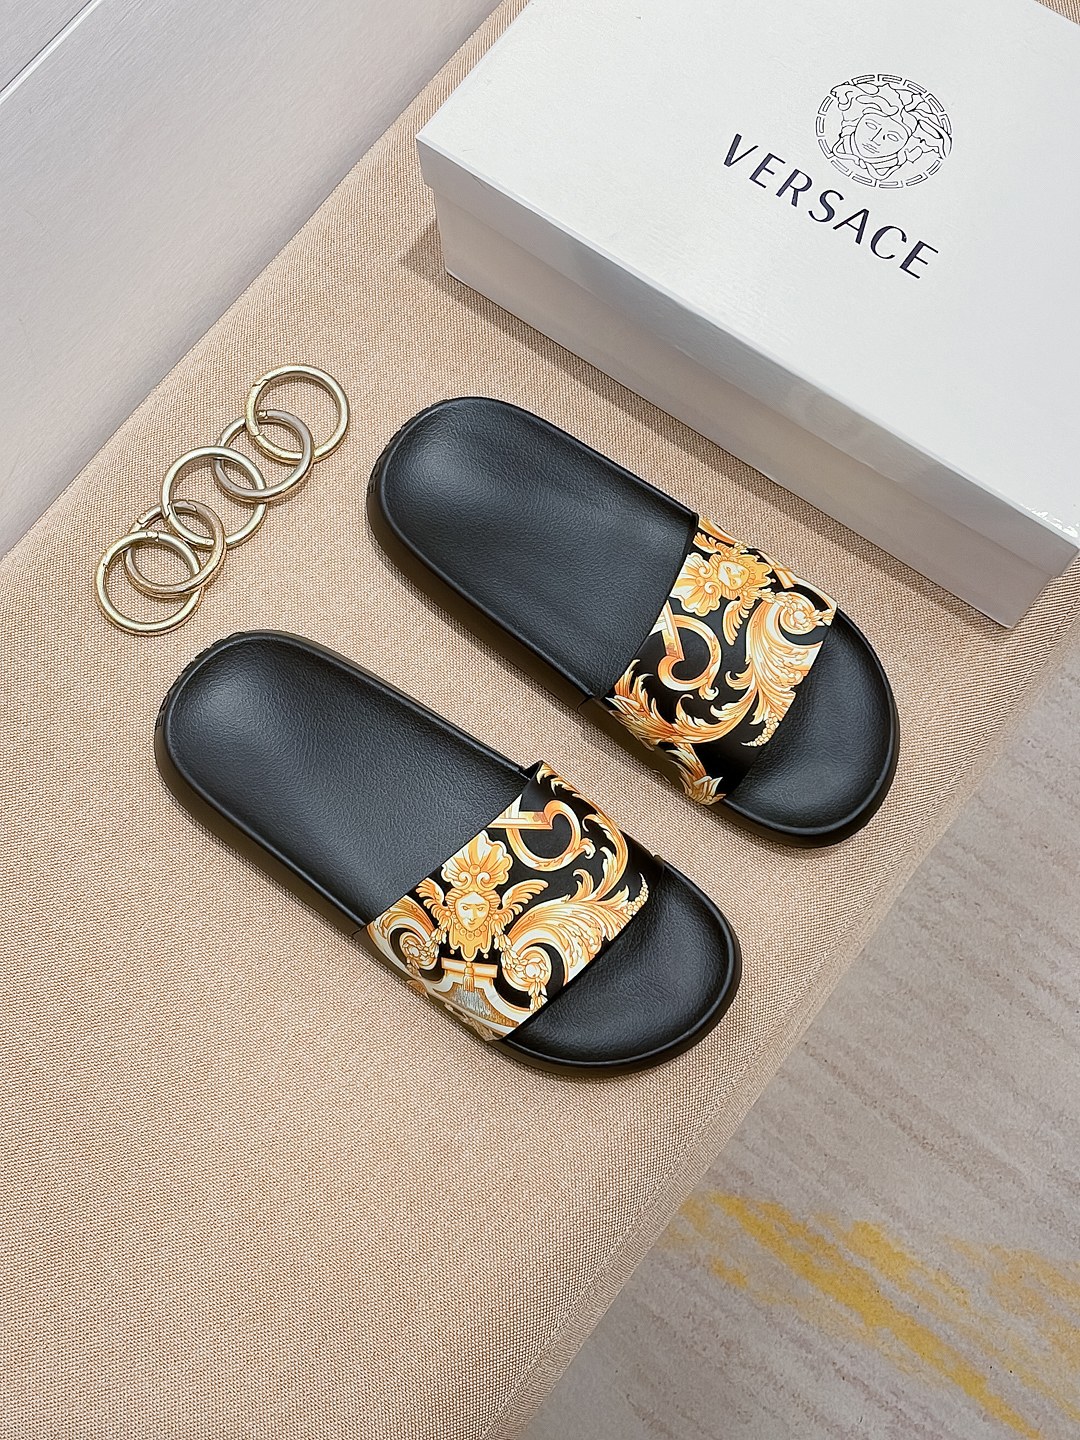 Versace Shoes Slippers Spring/Summer Collection Fashion Casual